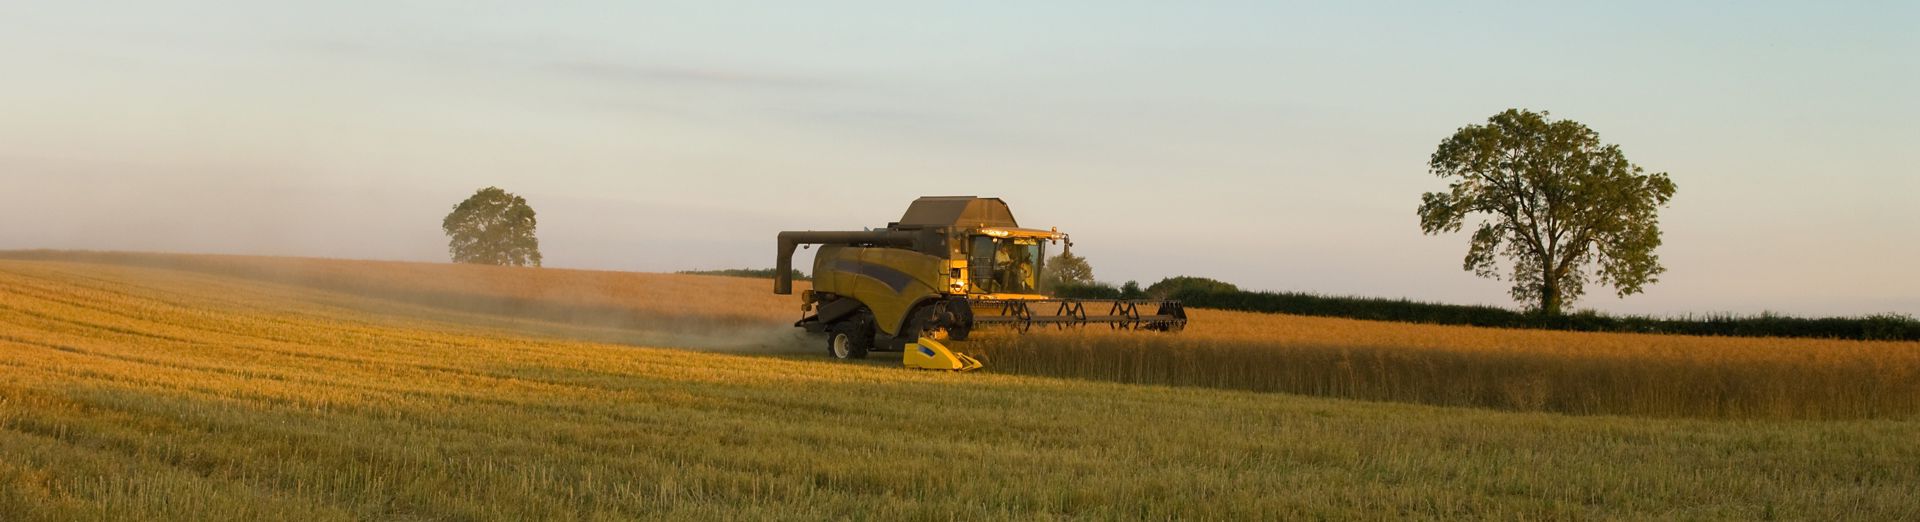 Combine machine in a large wheat field, representing the agribusiness industry